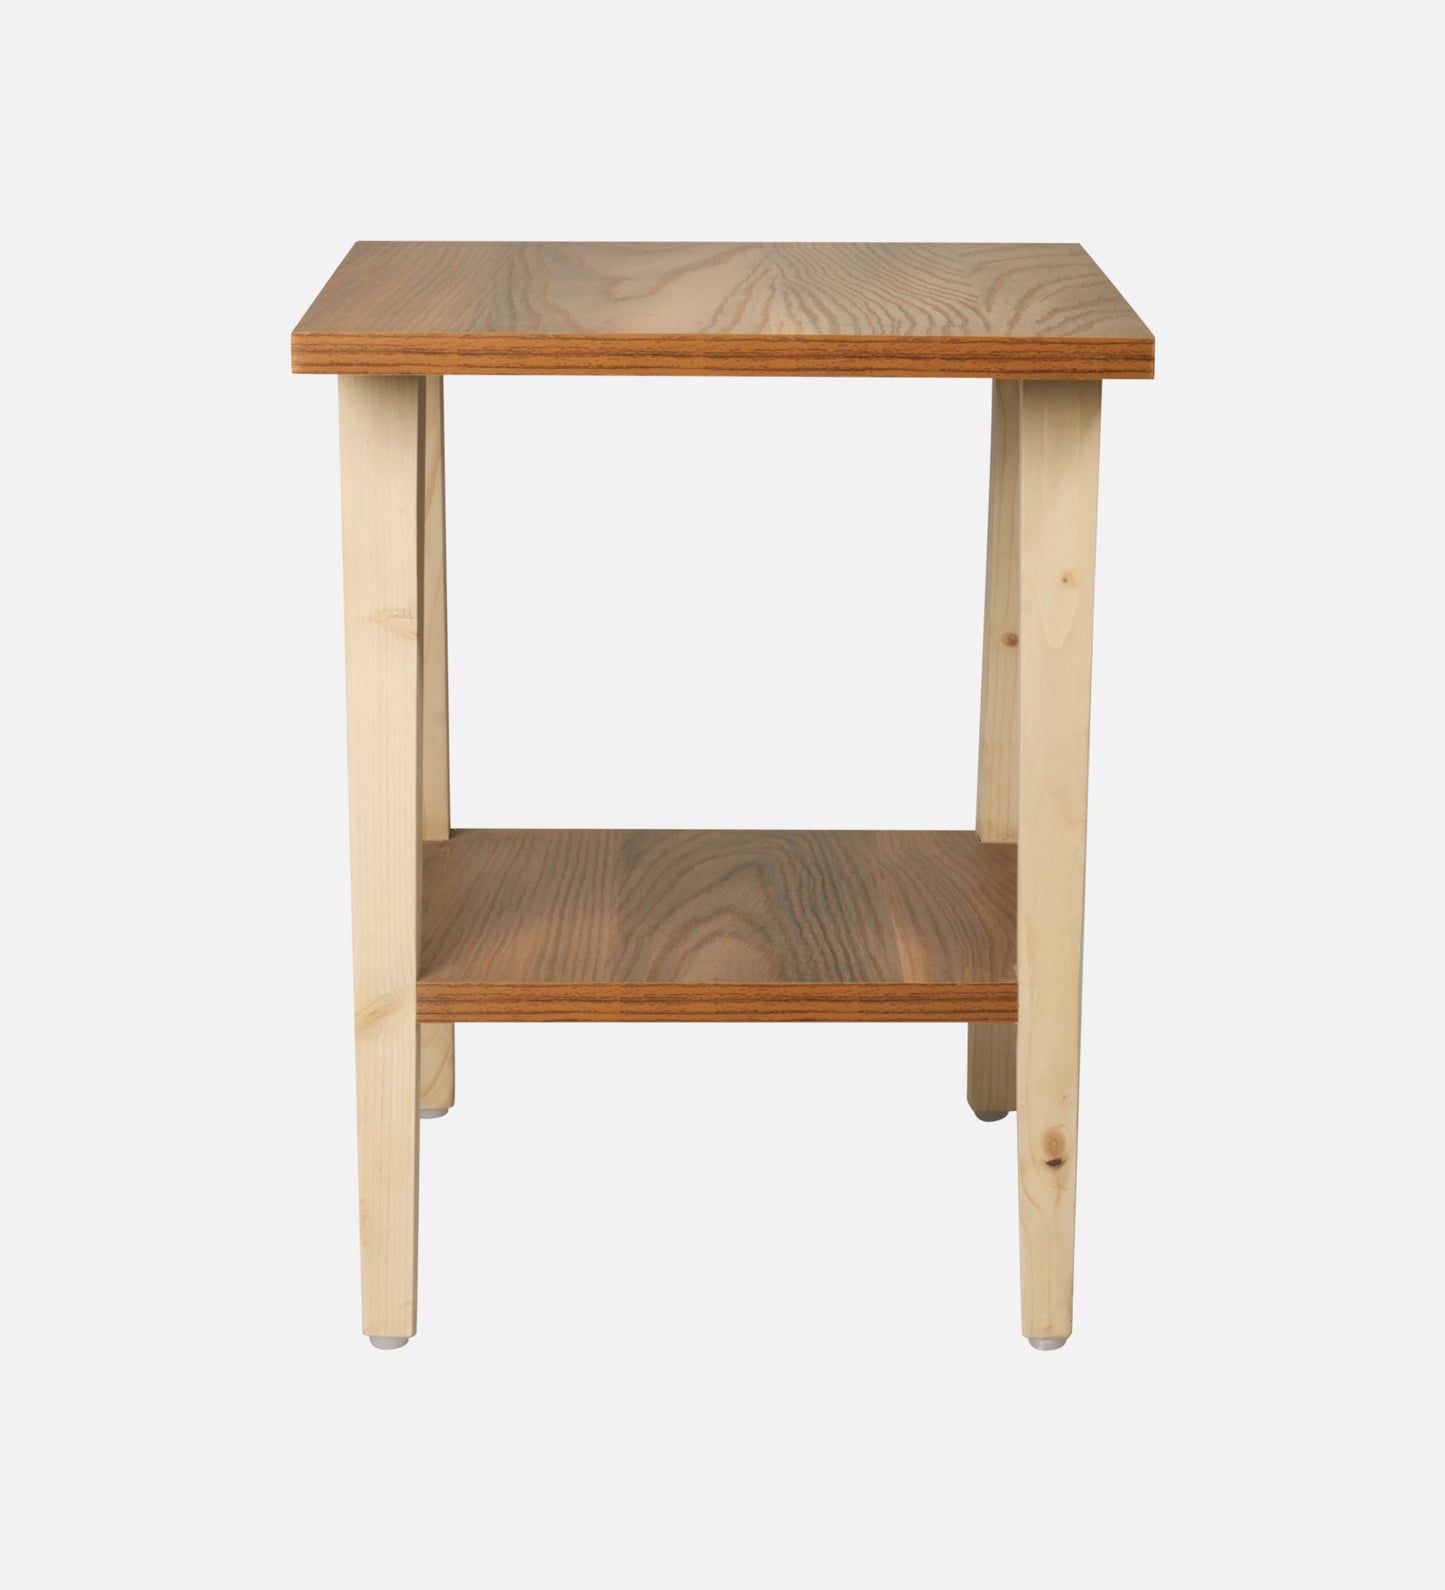 Trapezium Incline Table-  Side Table, Wooden End Table, Living Room Decor, Wooden Side Table, Living Room Table